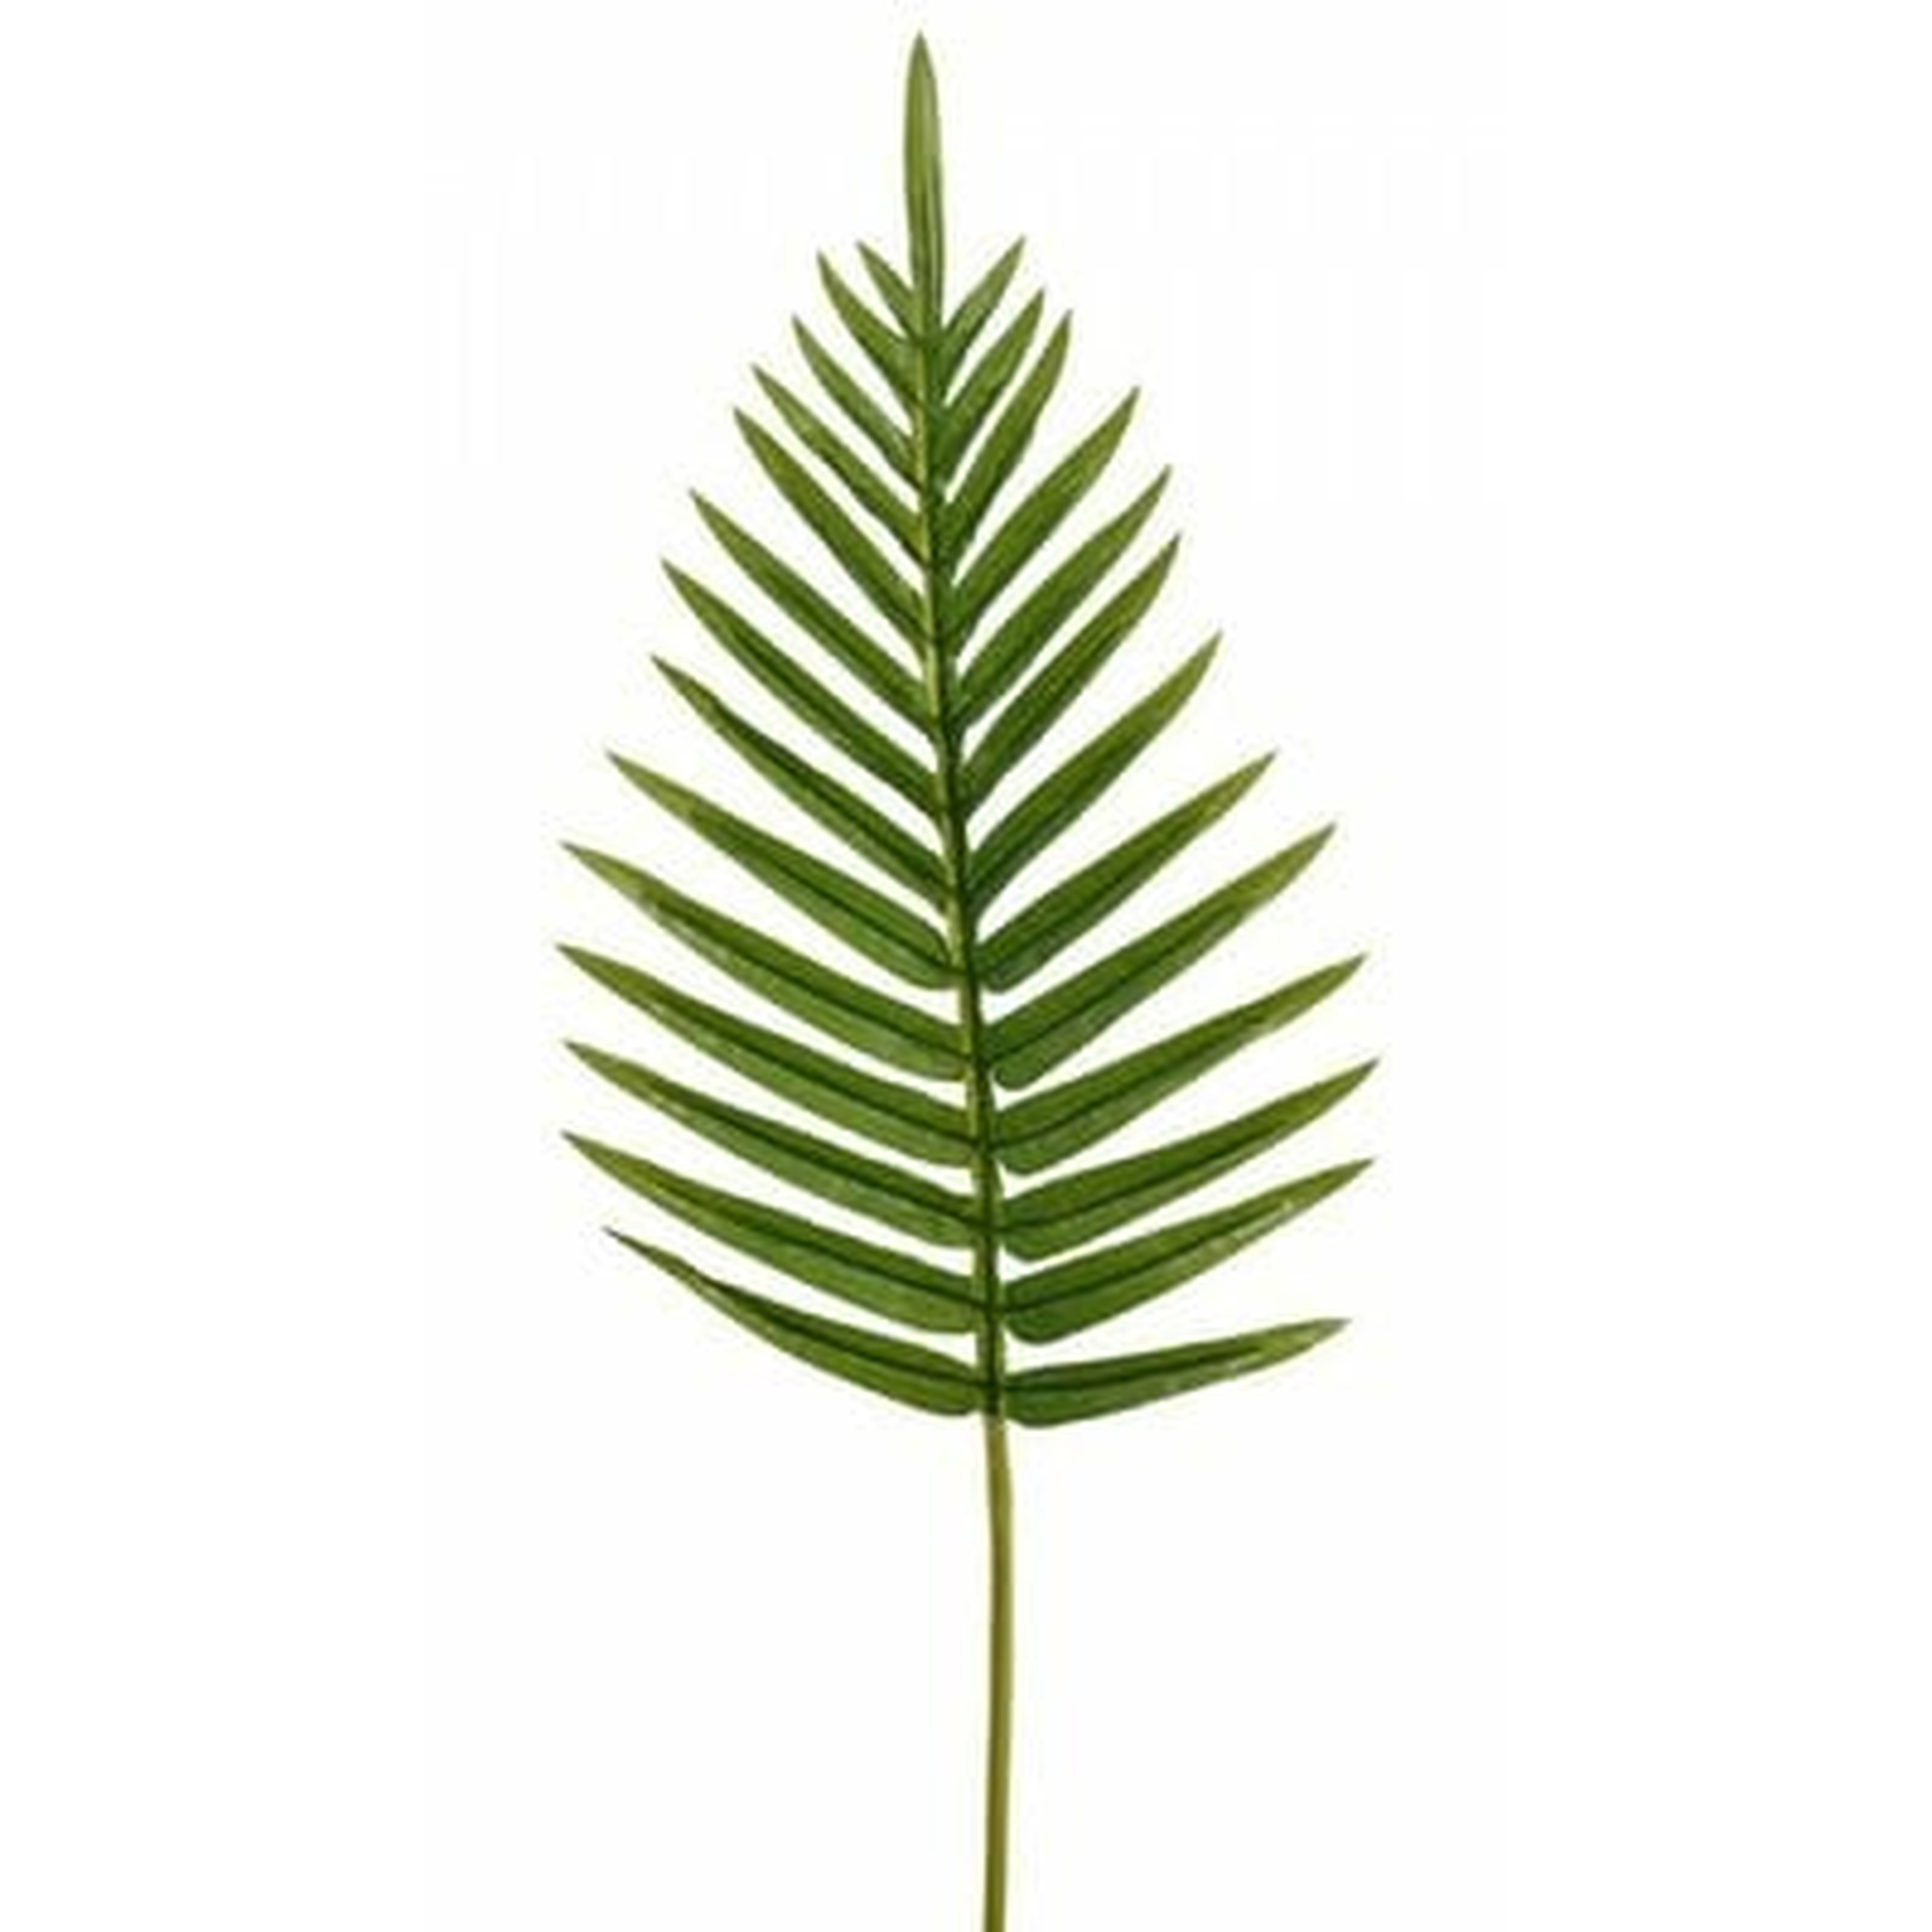 Bay Isle Home Large Faux Fern Leaf, Real Looking Plant Leaves for Decoration, Measures 26" Tall, Pack of 12 - Wayfair